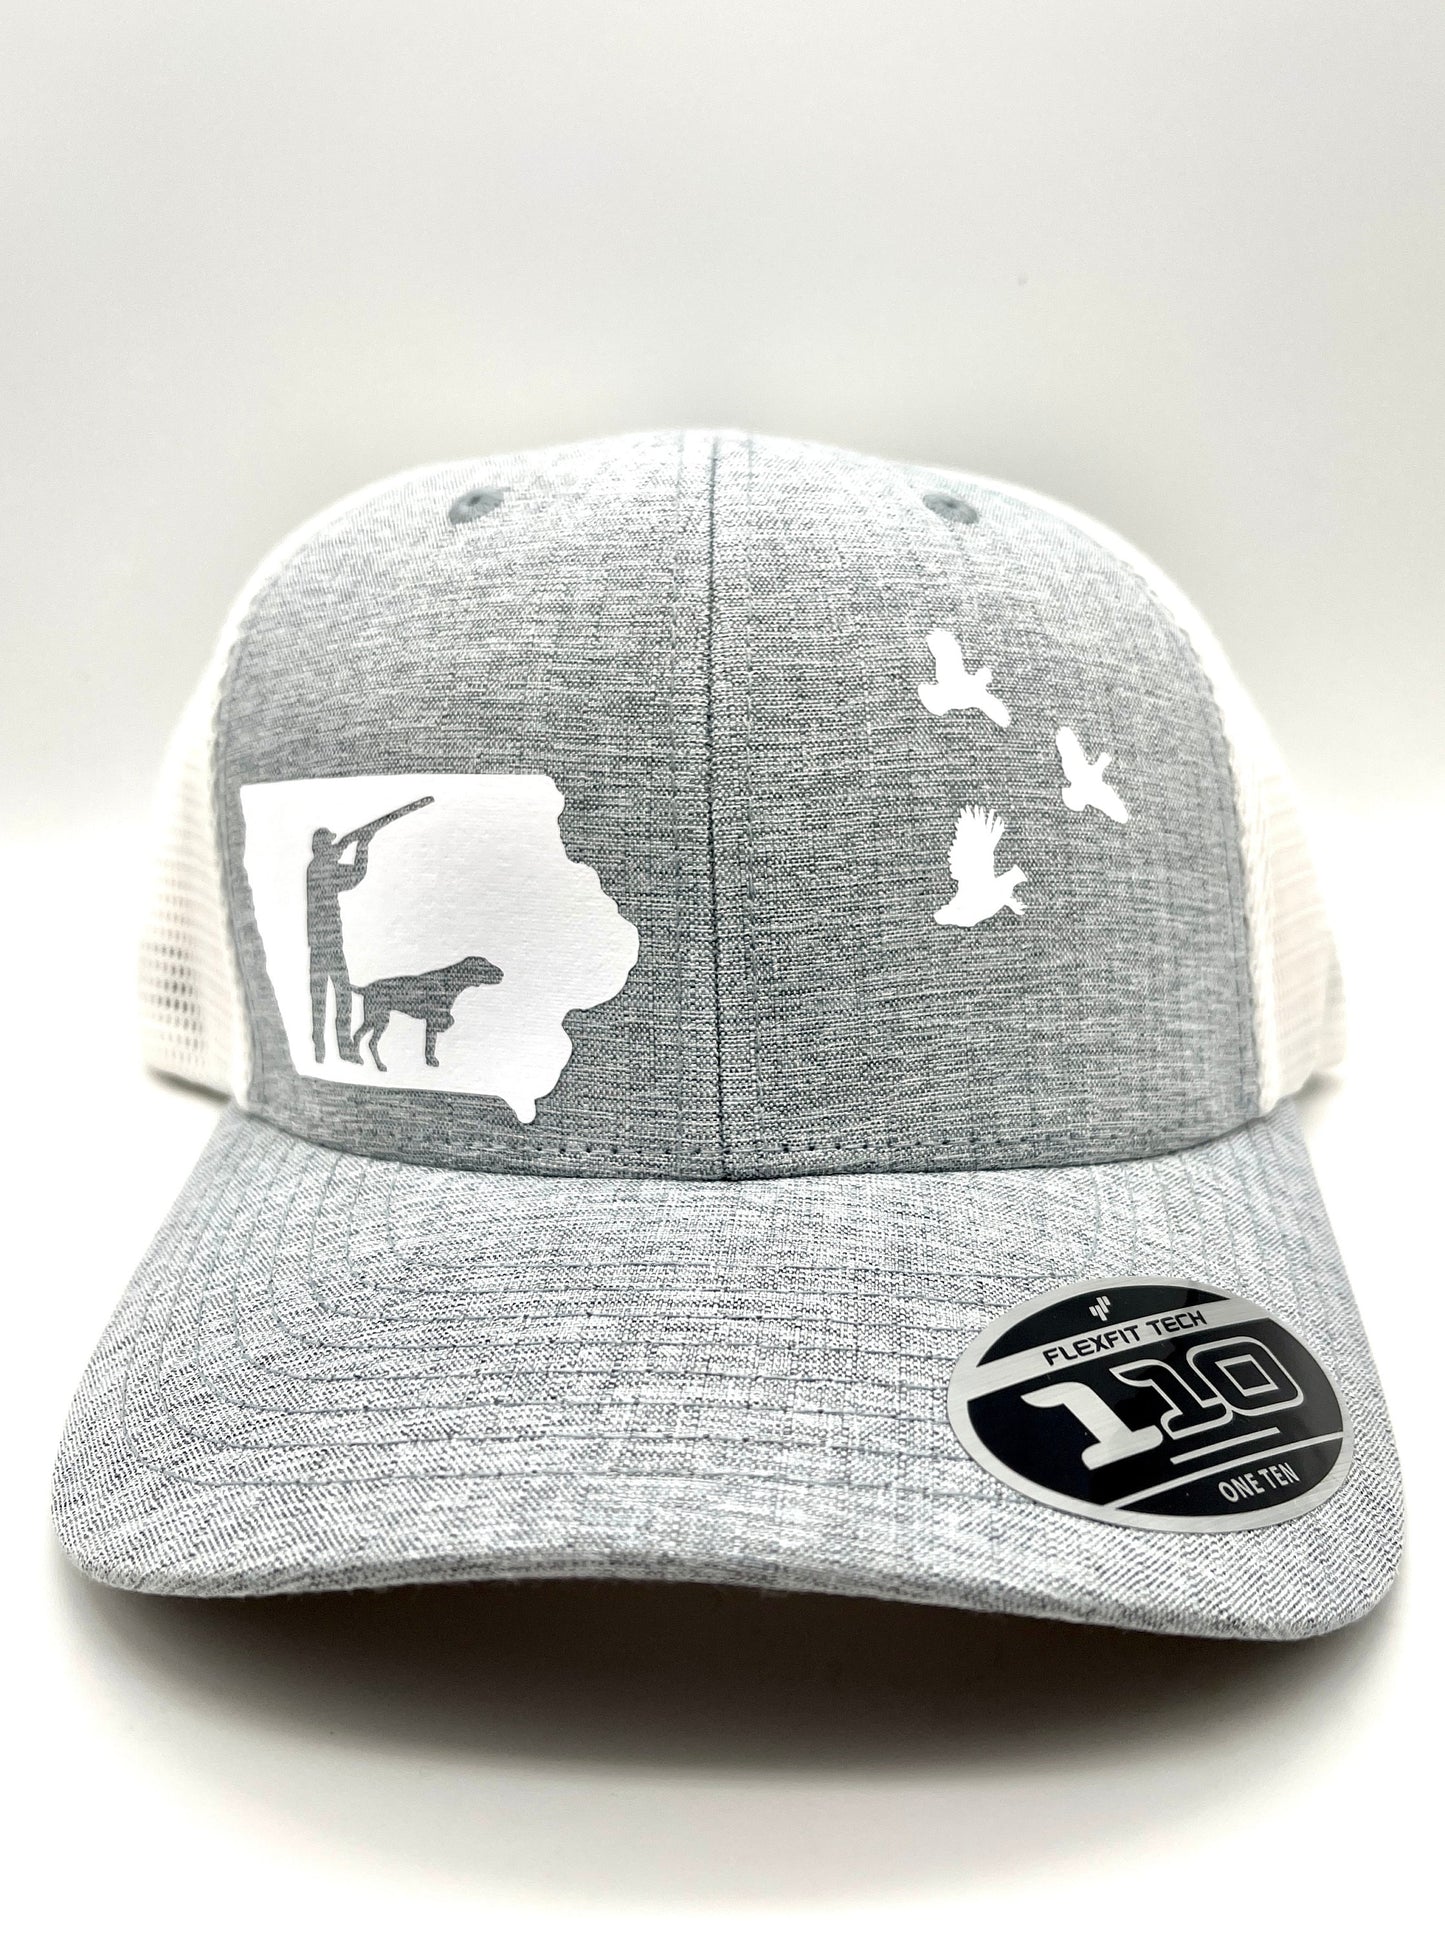 Any State Quail Hunter with Dog Snap Back Adjustable Hat in Multiple Hat Color Options